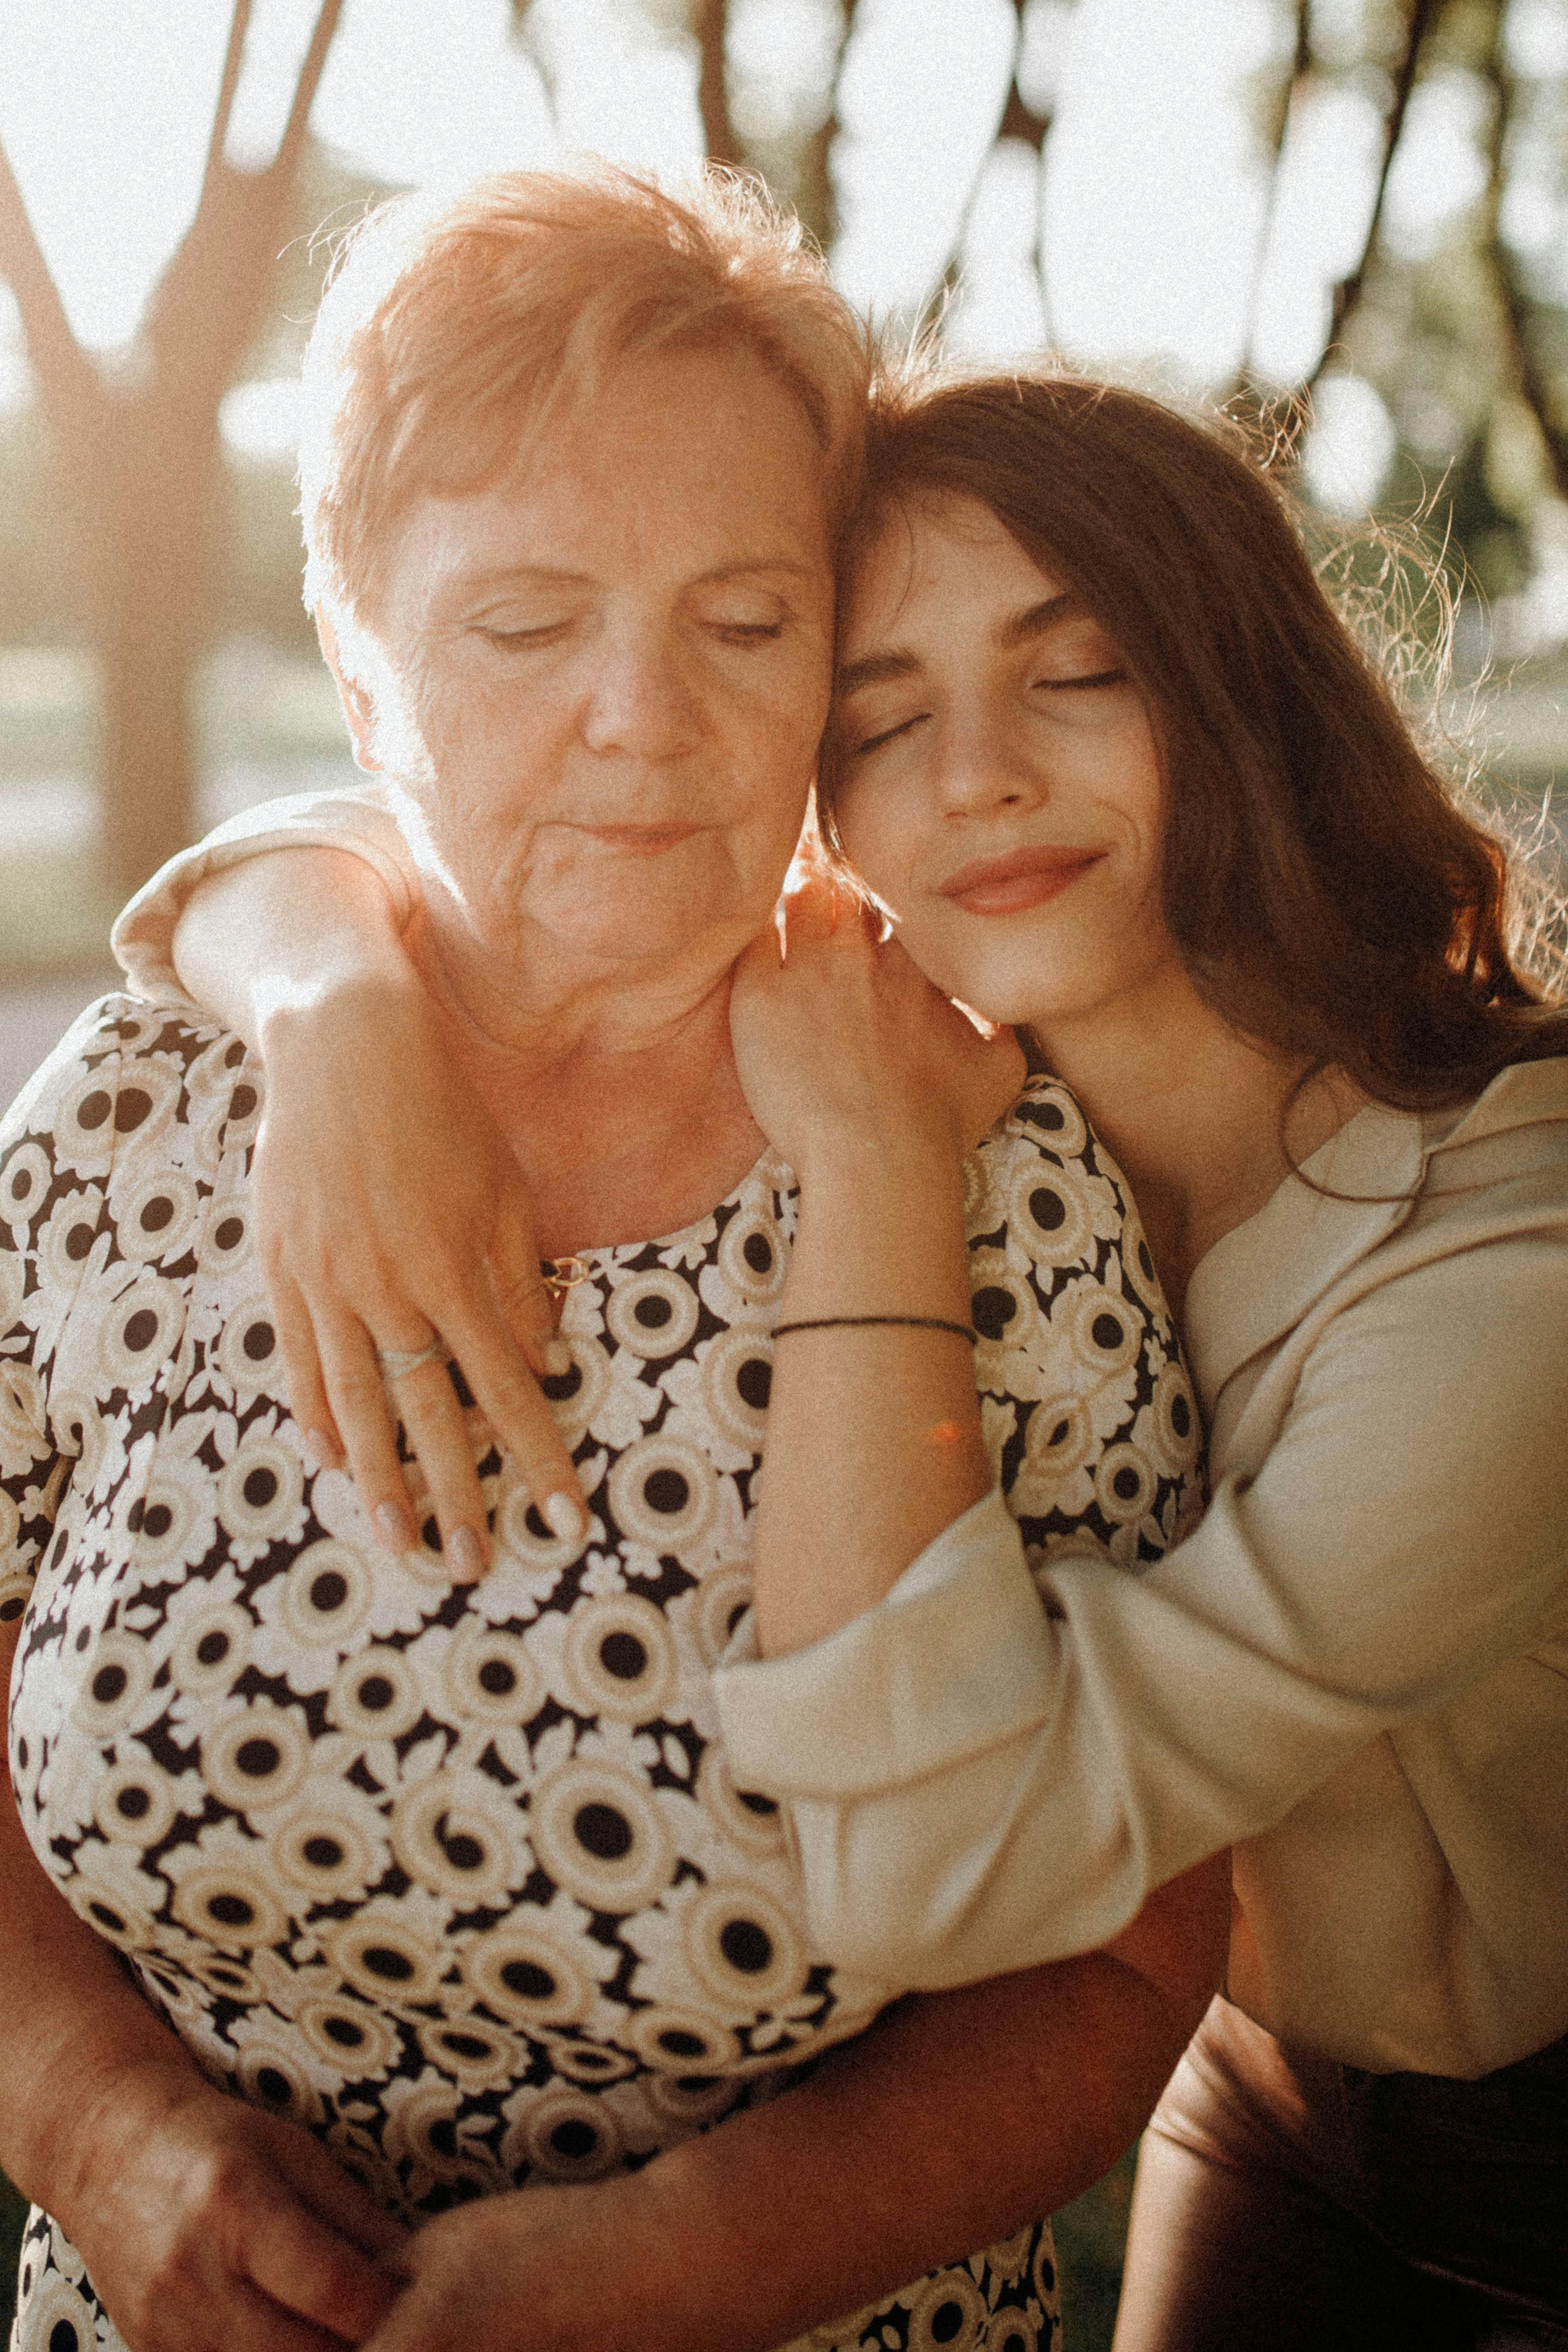 A young woman hugging her mother | Source: Pexels